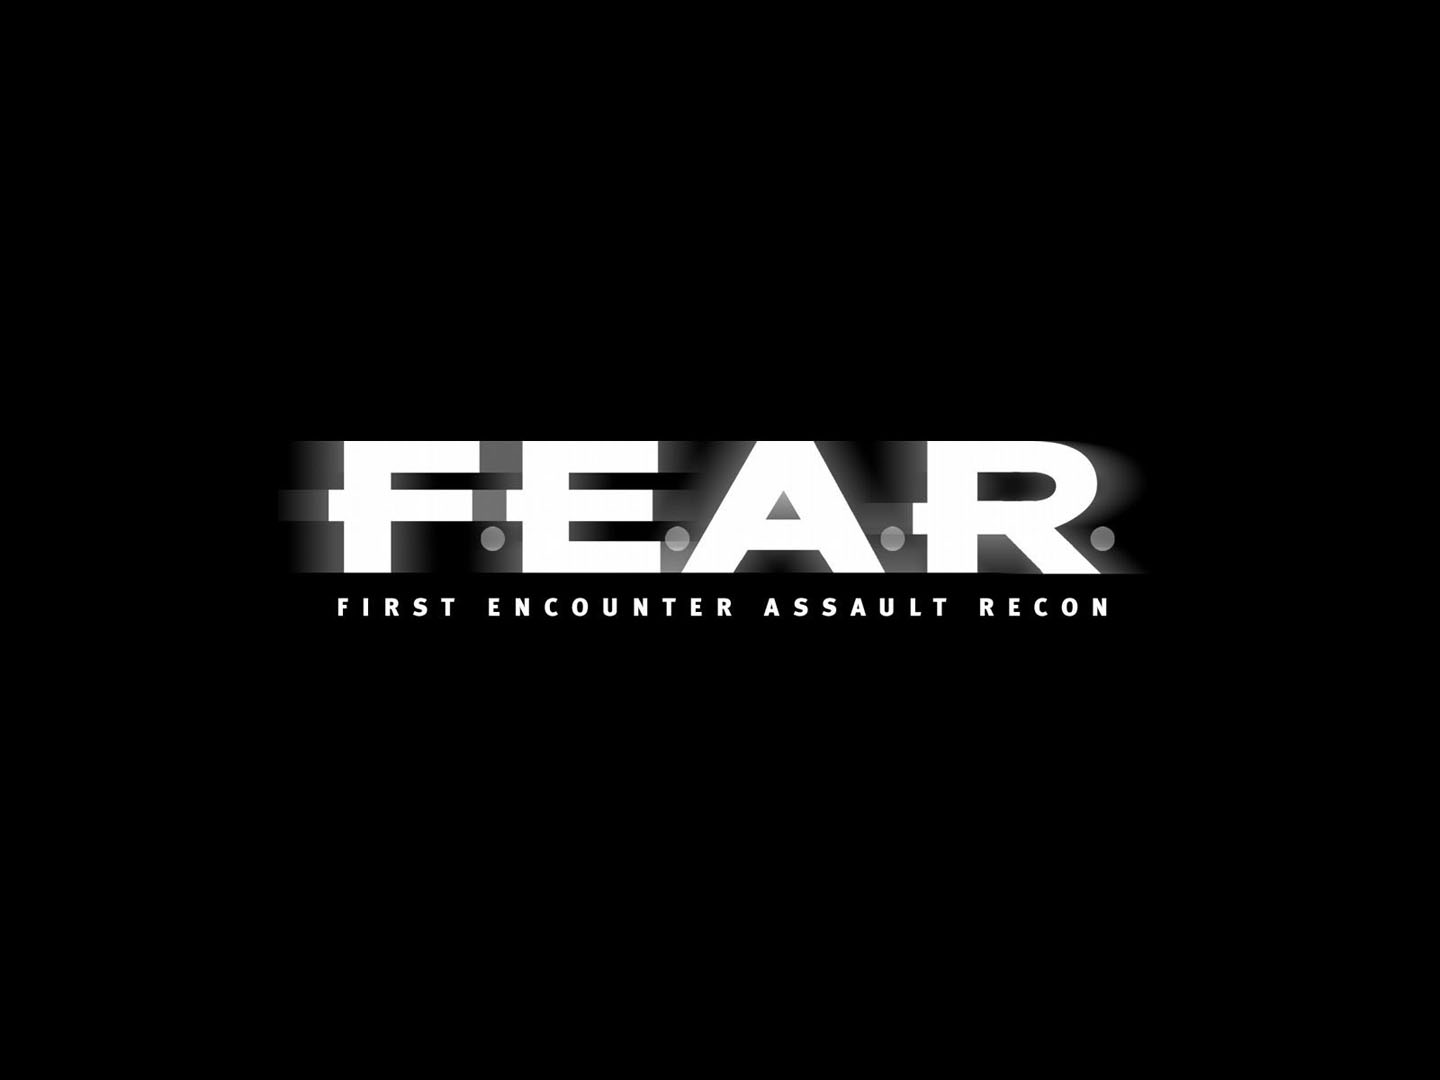 Logo Action Games Wallpaper Image Featuring Fear